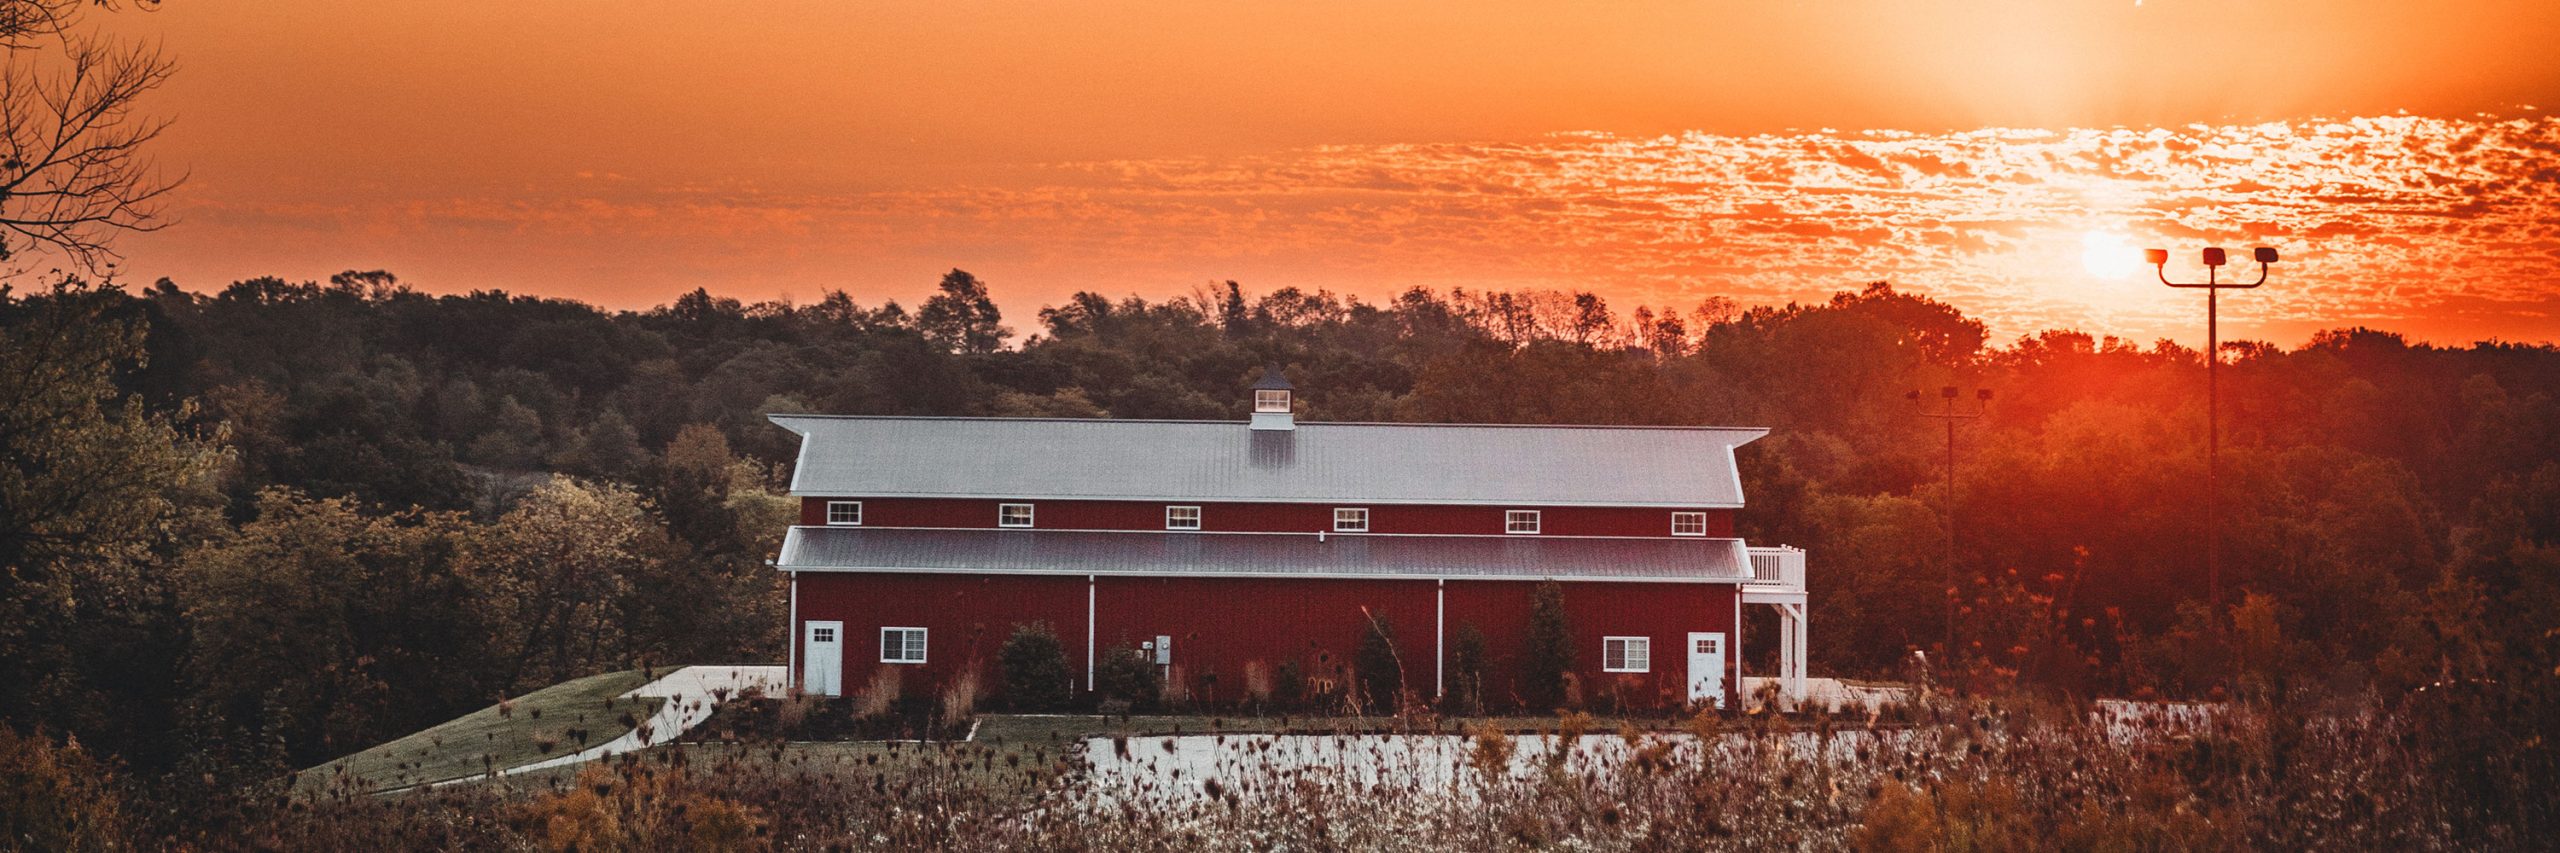 Red Acre Barn